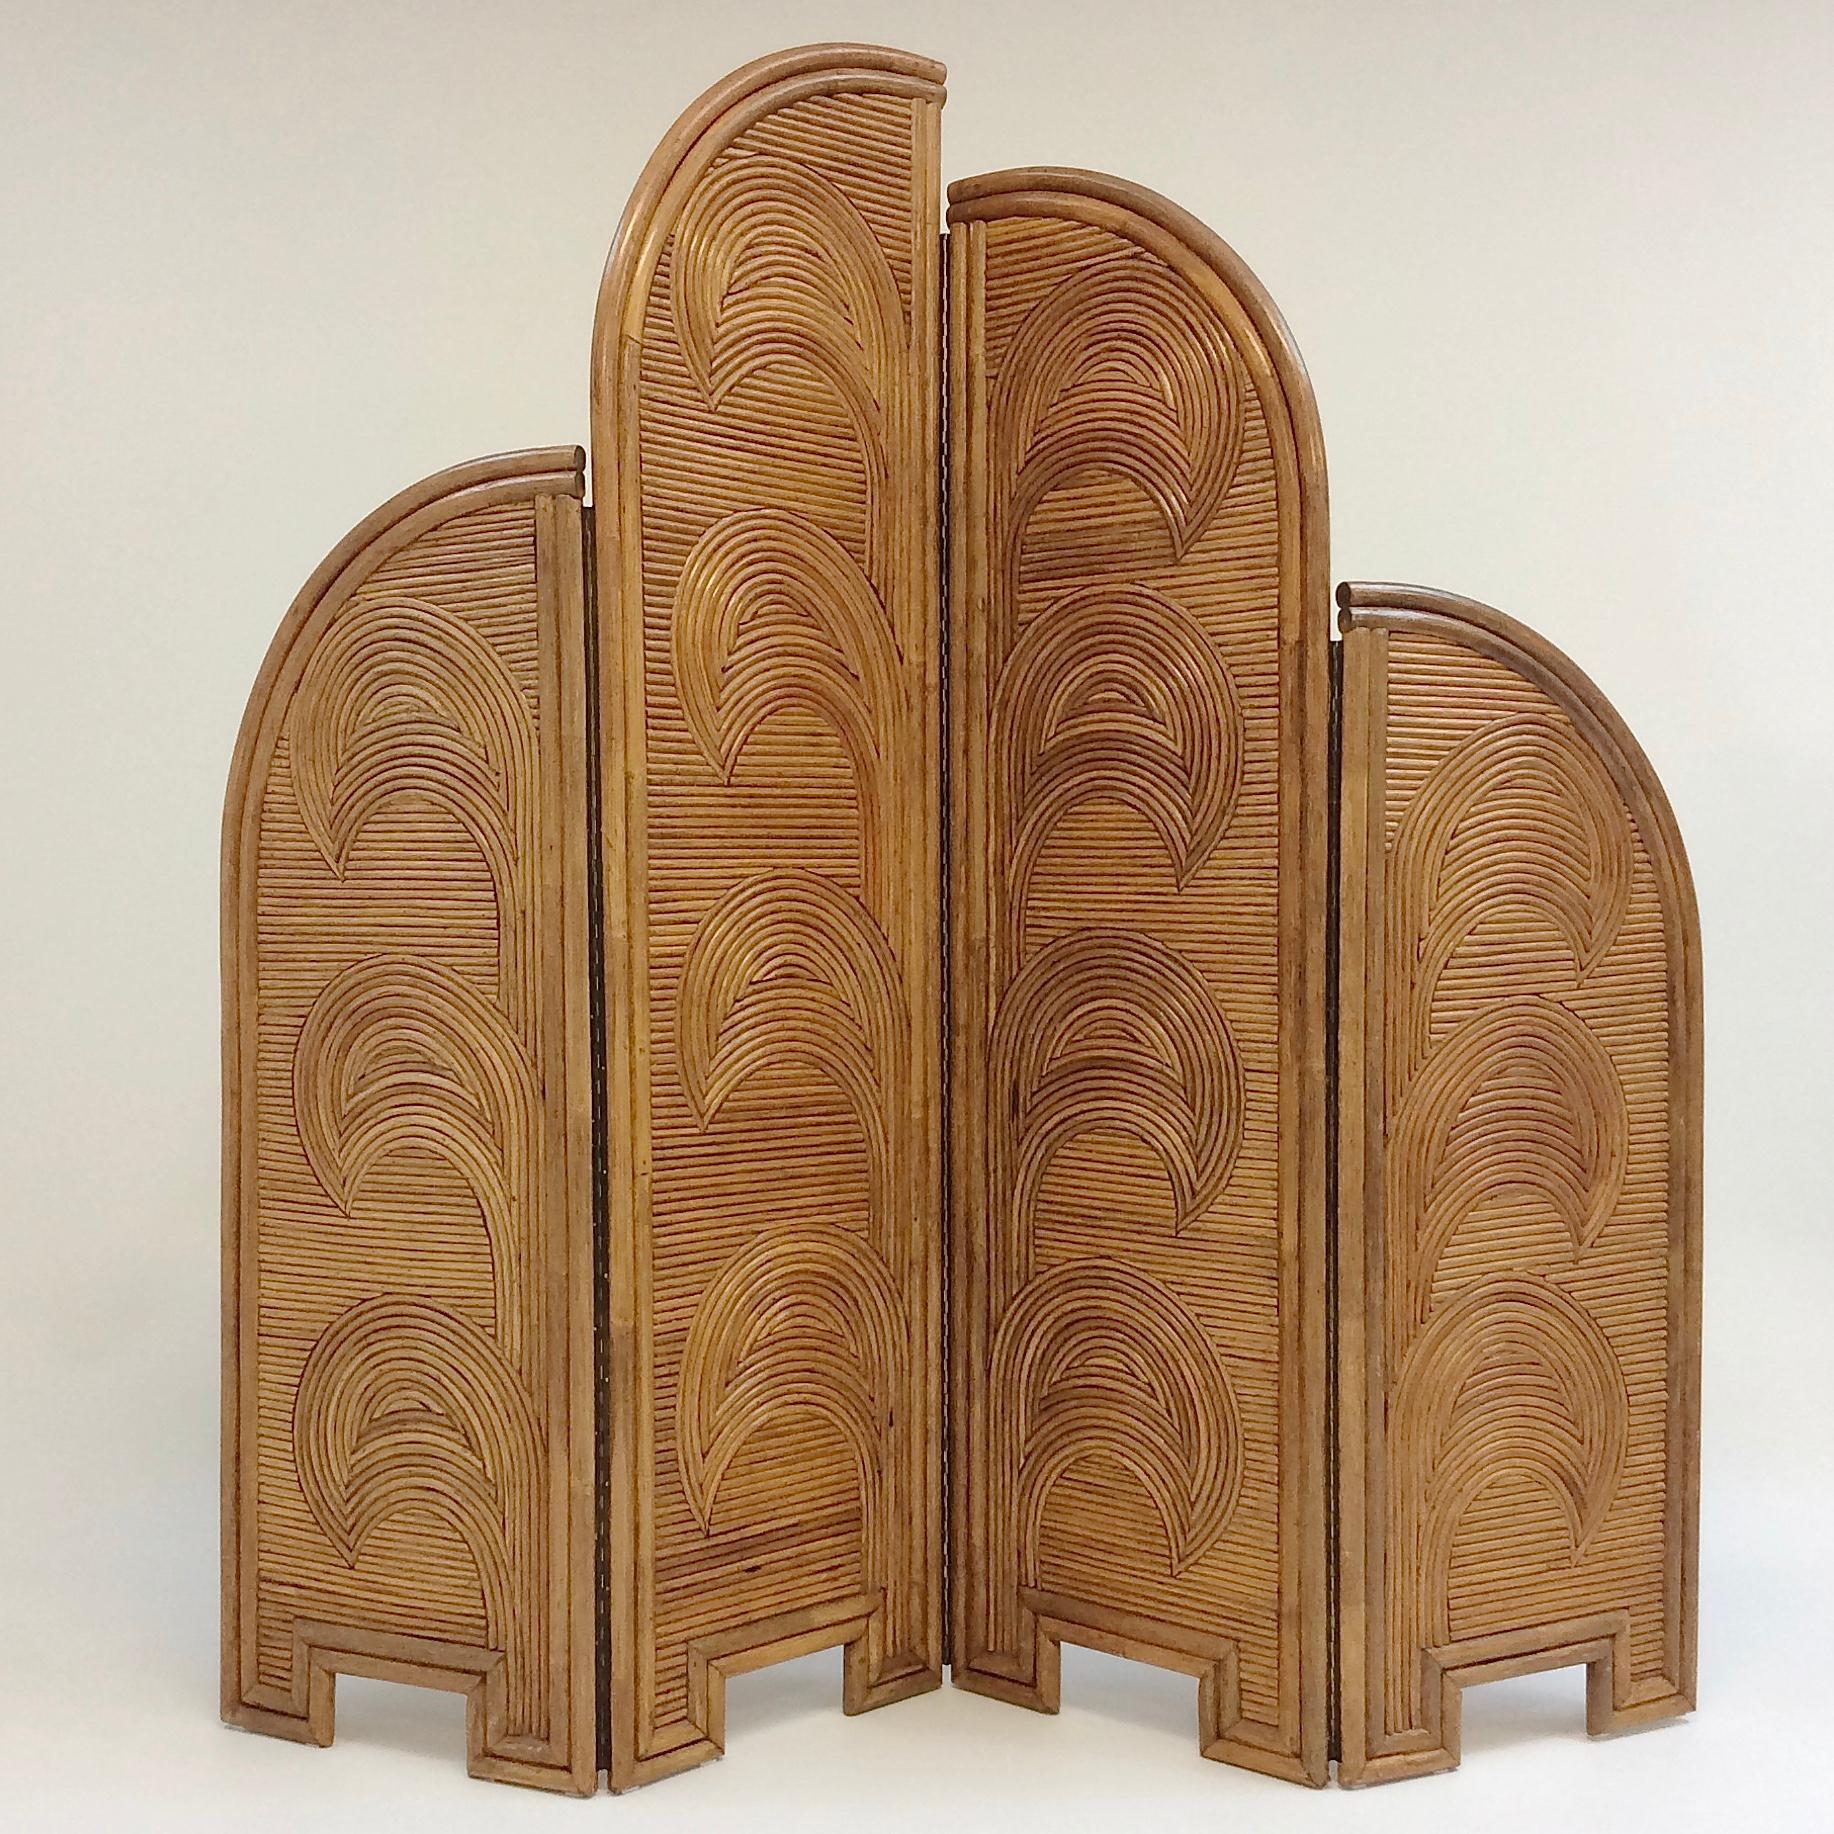 Spectacular and rare vintage decorative bamboo four-panel screen, Vivai del Sud, circa 1970, Italy.
Dimensions: 210 cm H, 4 cm D, 220 cm W open, each panel: 55 cm wide.
Piece in good original condition.
All purchases are covered by our buyer